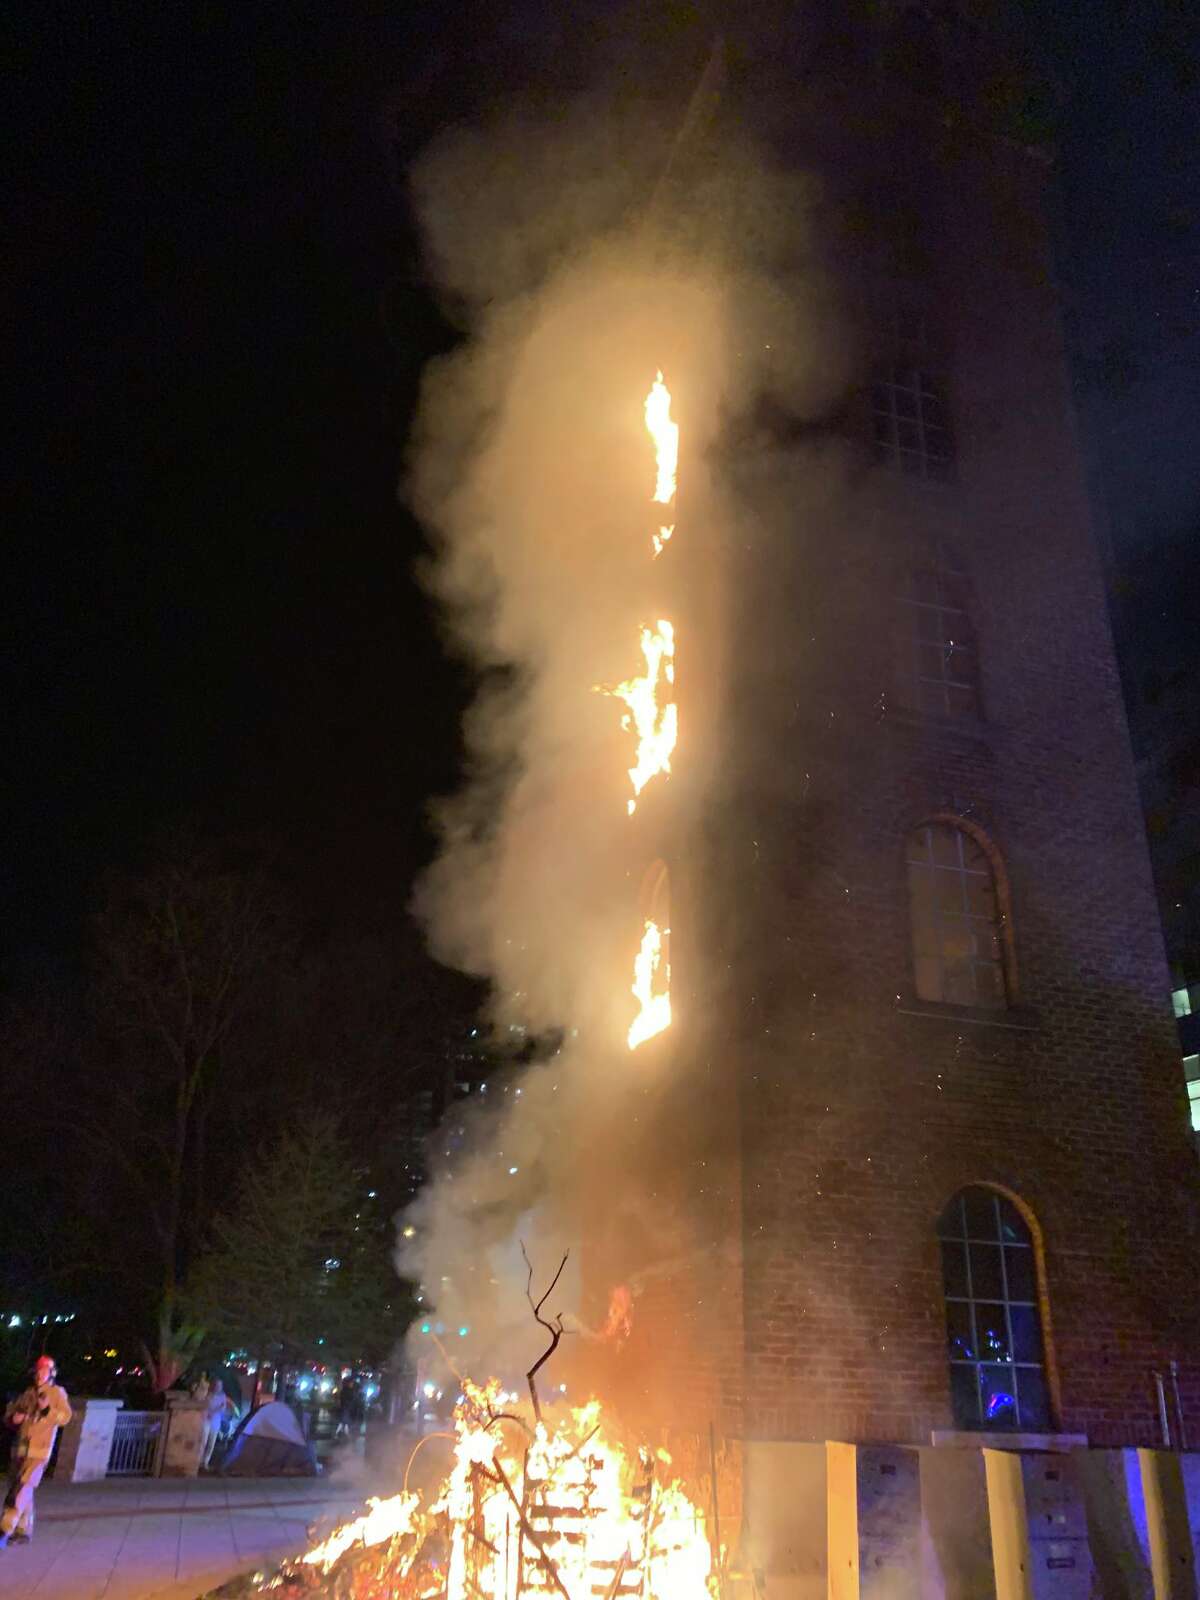 Austin Fire Department responded to a fire at the historic Buford Tower in the downtown area.